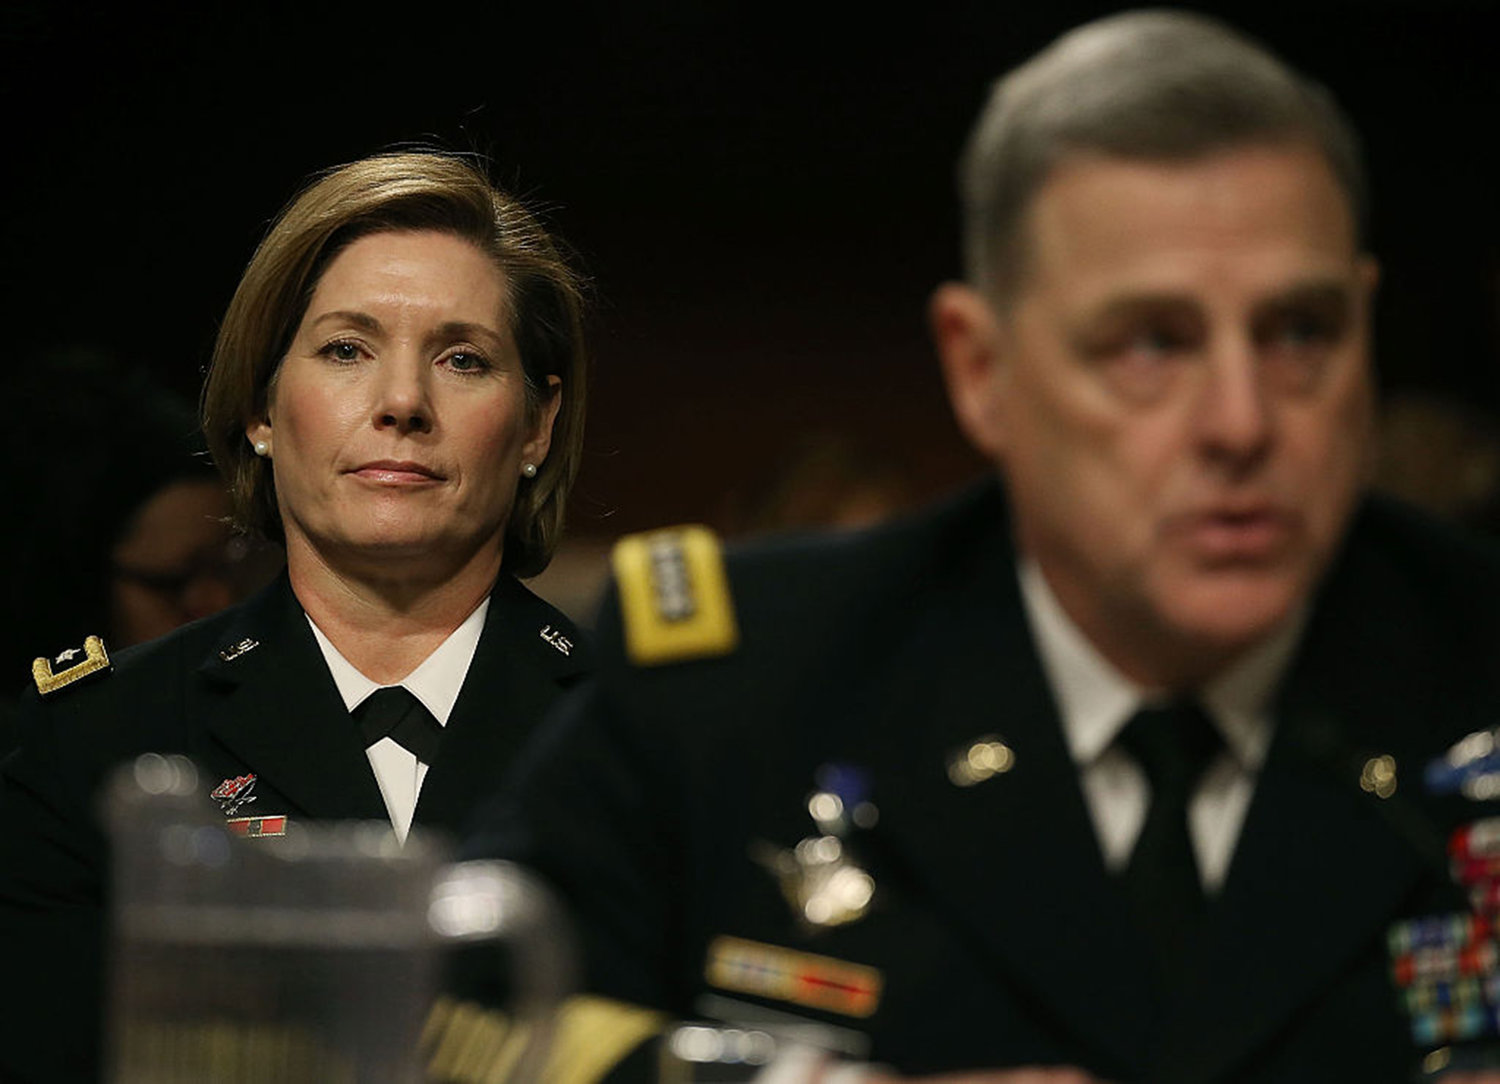 U.S. Army Gen. Laura Richardson sits behind U.S. Army Chief of Staff Mark Milley while he testifies about women in the military during a Senate Armed Services Committee hearing on Capitol Hill, Feb. 2, 2016, in Washington, D.C. The issue of women and the draft has come up in Congress recently. (Mark Wilson/Getty Images/TNS)